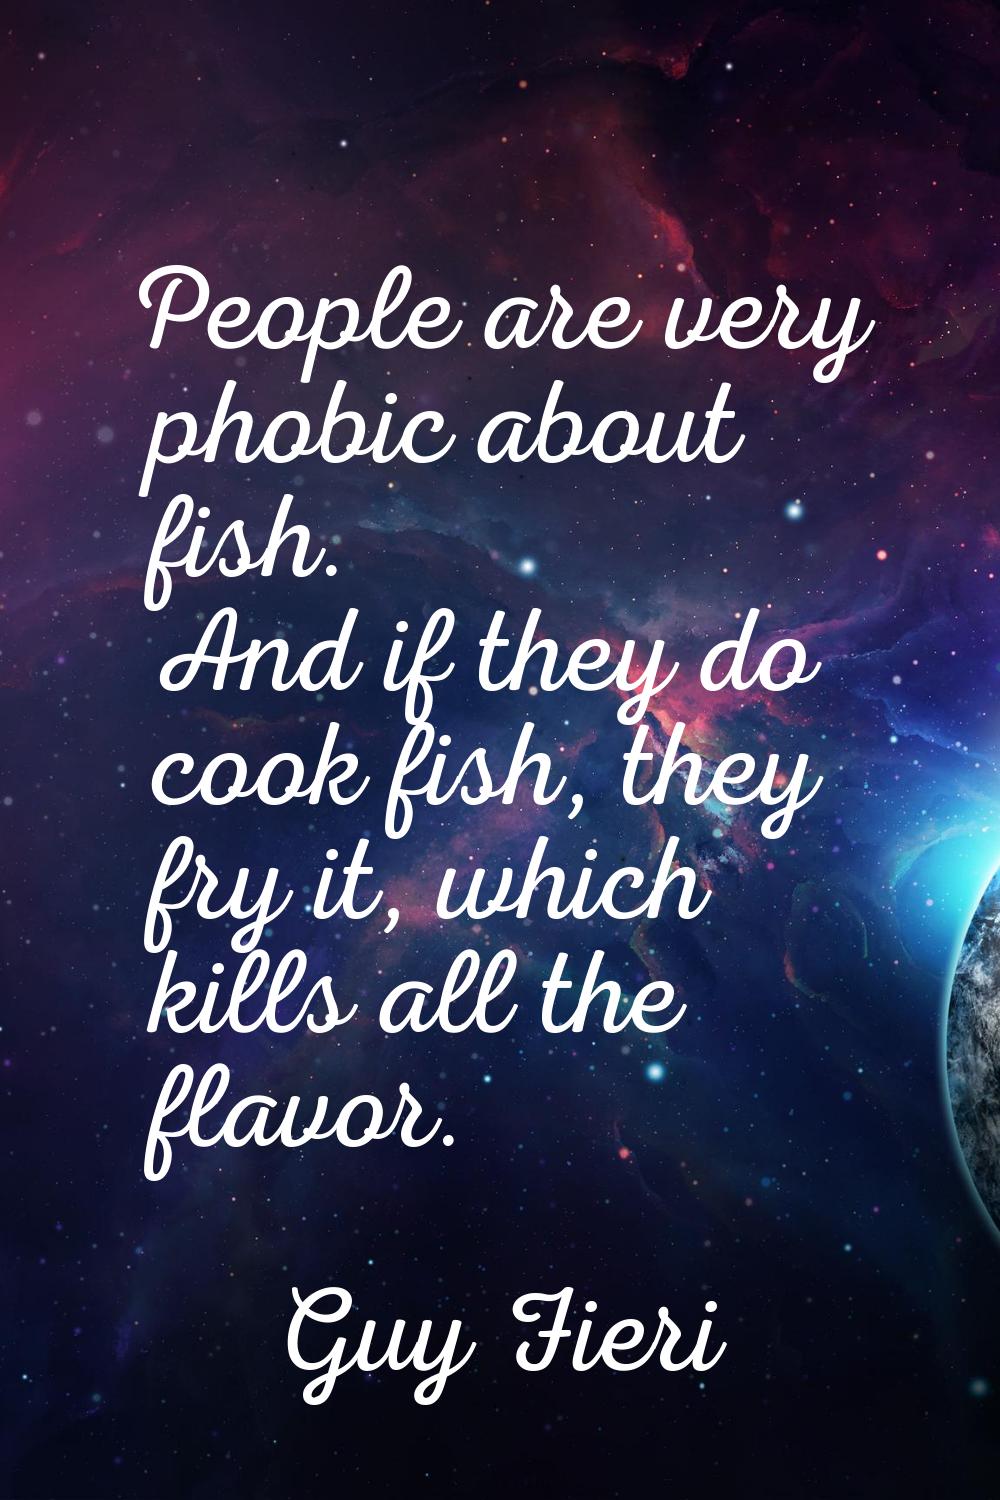 People are very phobic about fish. And if they do cook fish, they fry it, which kills all the flavo